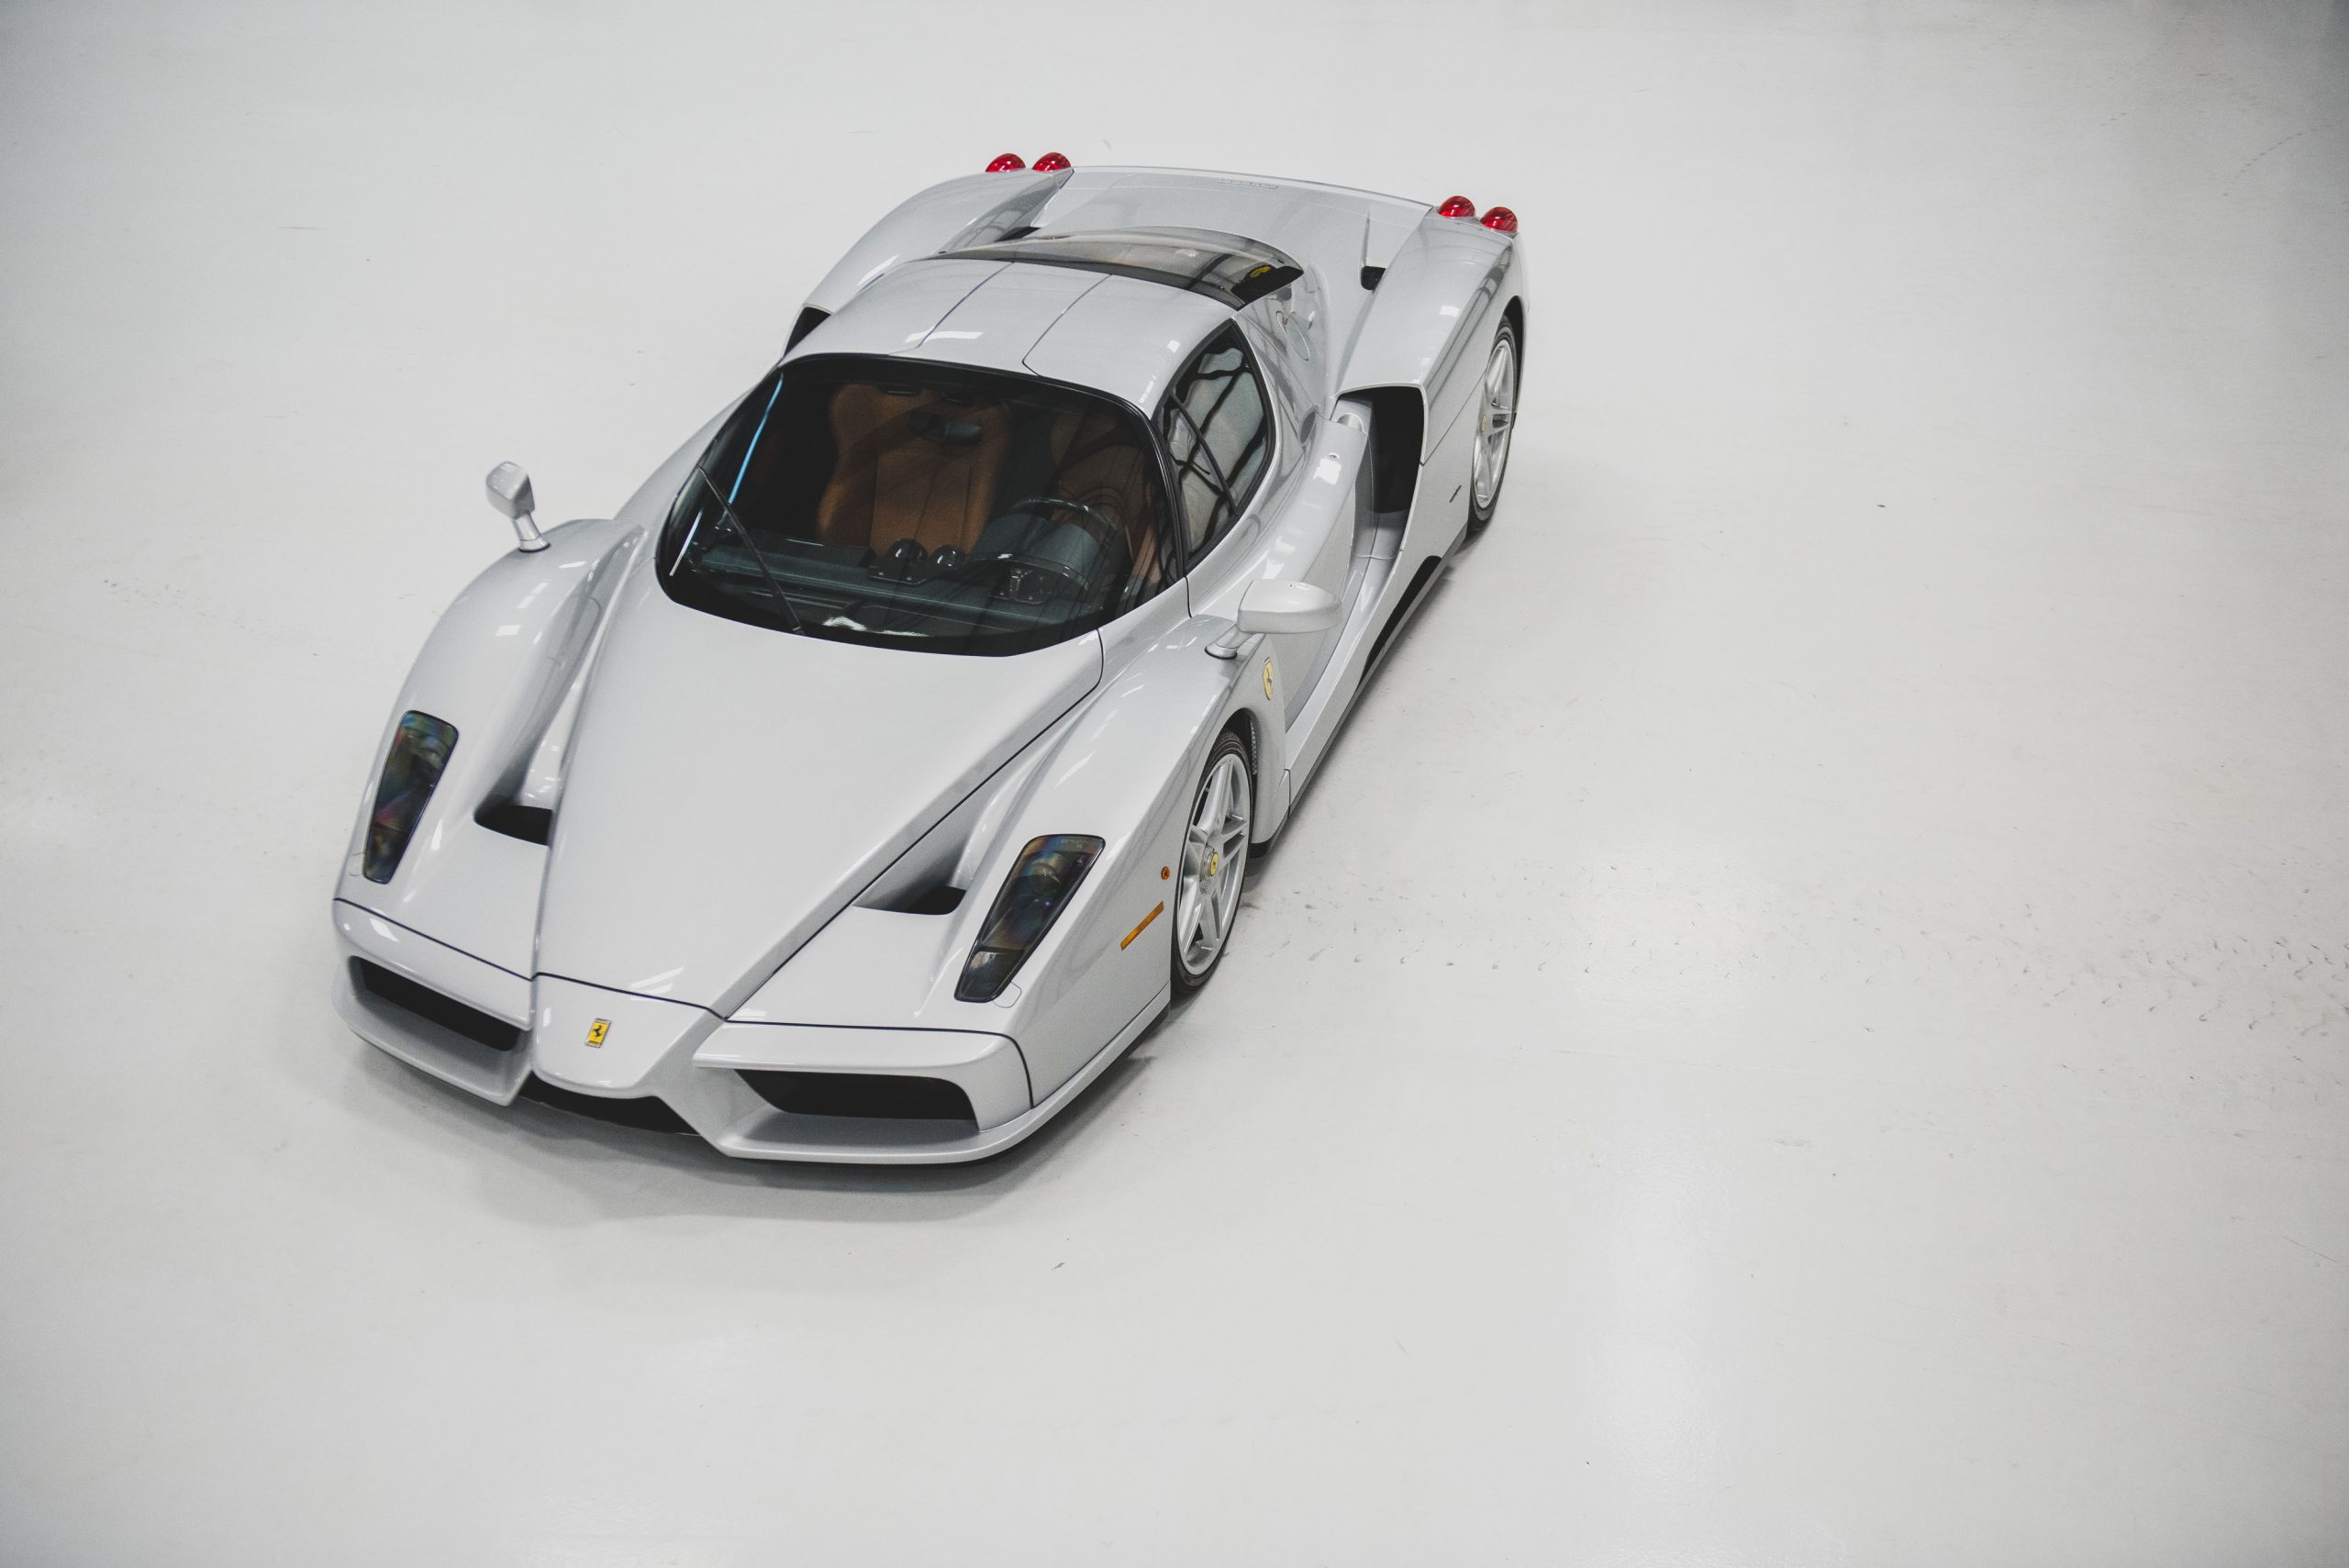 A Ferrari Enzo With Factory Wrapping Only 141 Miles On The Odometer